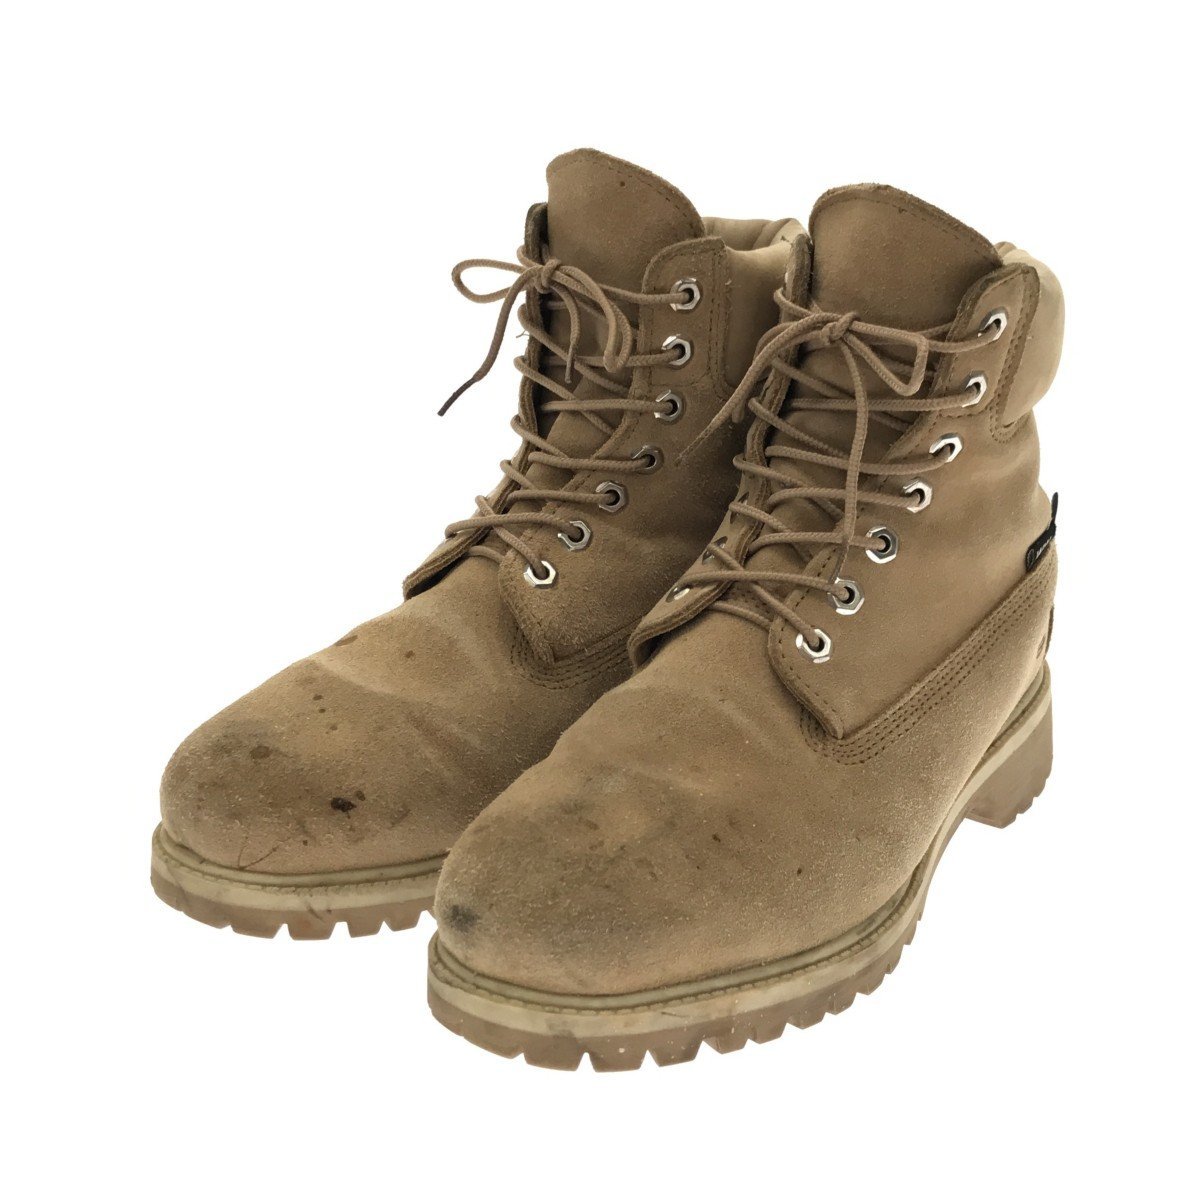 Timberland ティンバーランド ウッドウッド 【2763M】 Winter Extreme 6 Inch Boot 27cm BEIGE SUEDE TB 0A28N3 257US 03885 DK 2200のサムネイル